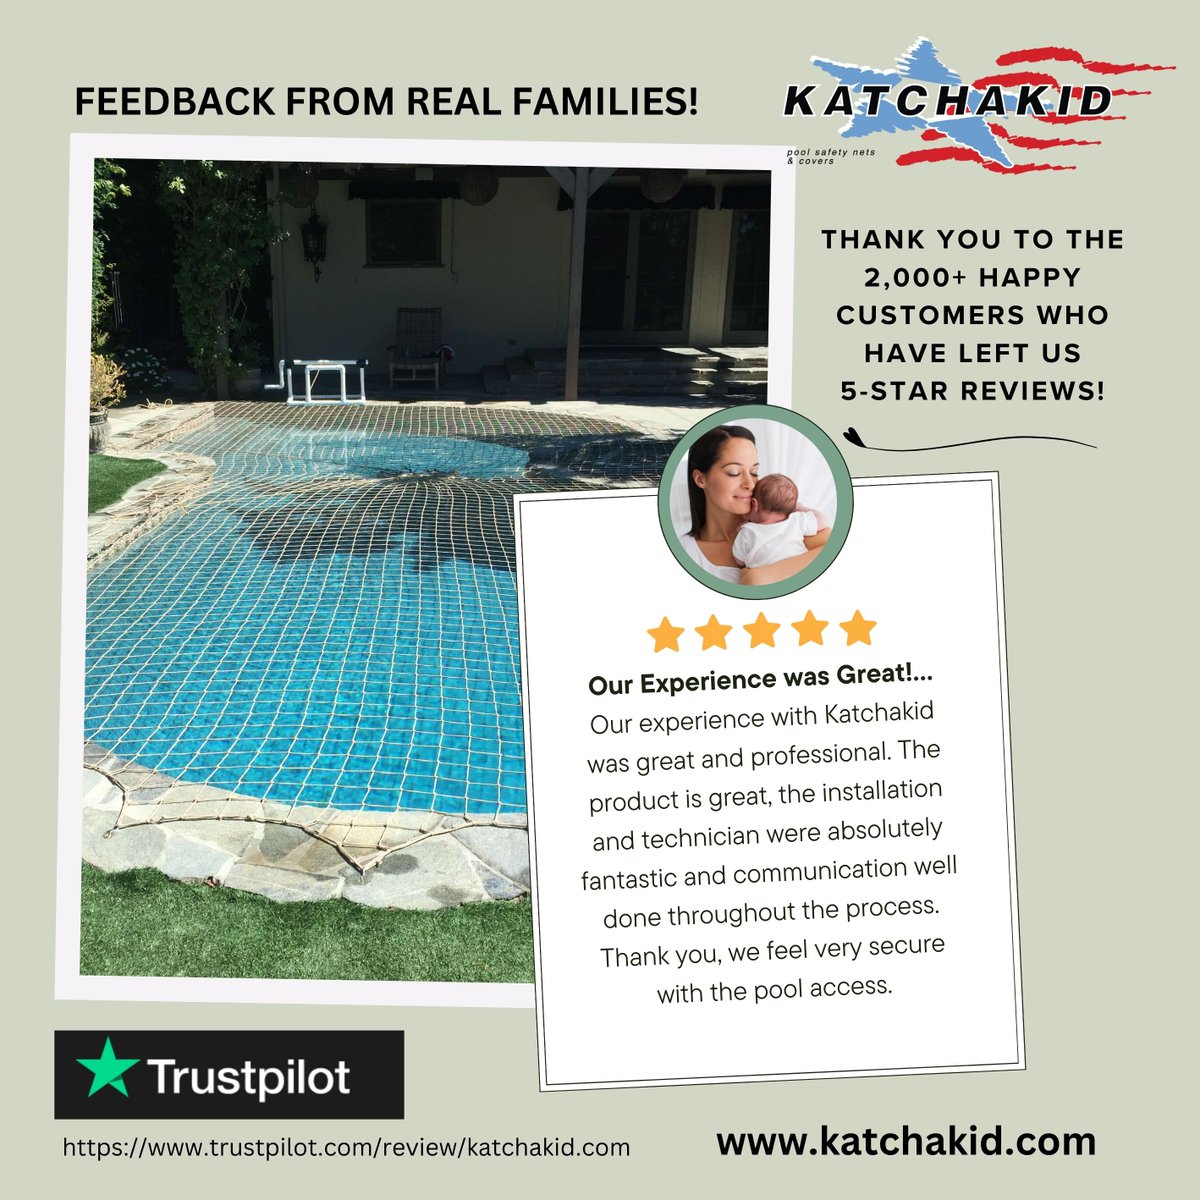 Thank you to the 2,000+ happy customers who have left us 5-star reviews! Your feedback fuels our commitment to providing the best pool safety nets. Here's to making every pool a safe place! 🌊 #KatchaKidinc #PoolSafety